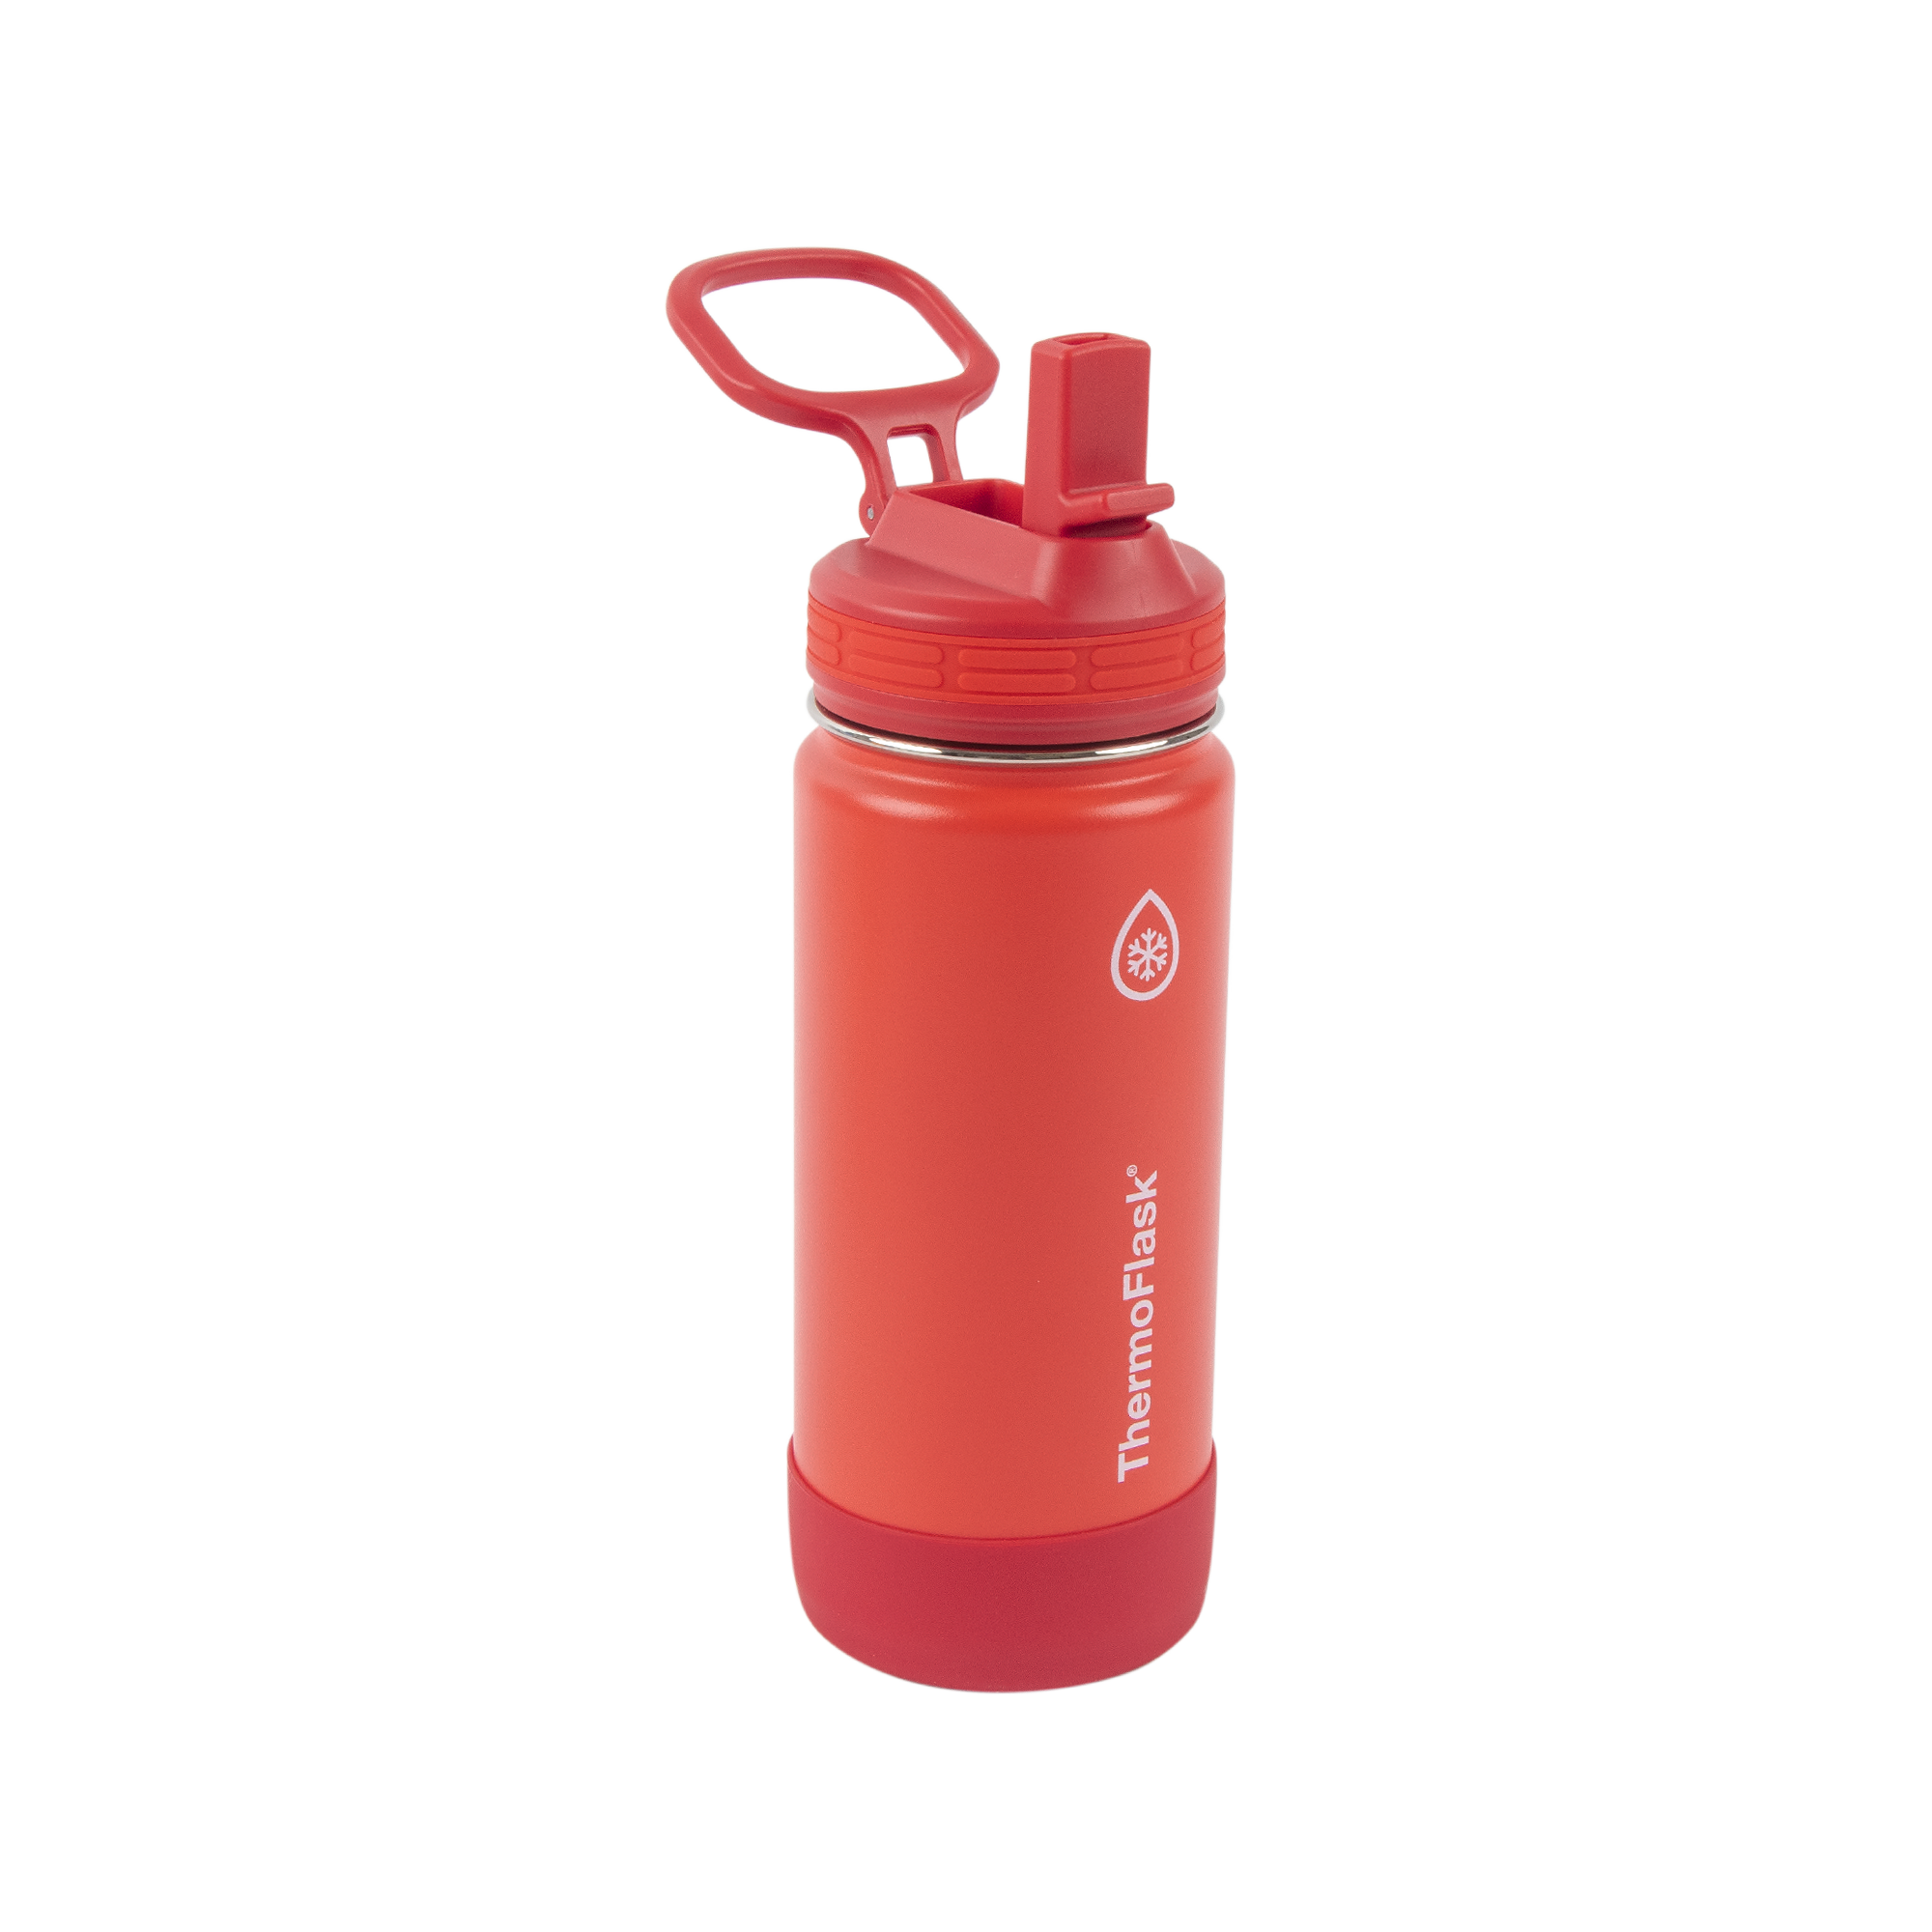 ThermoFlask 16 Oz Stainless Steel Kids Water Bottles w Straw Lid